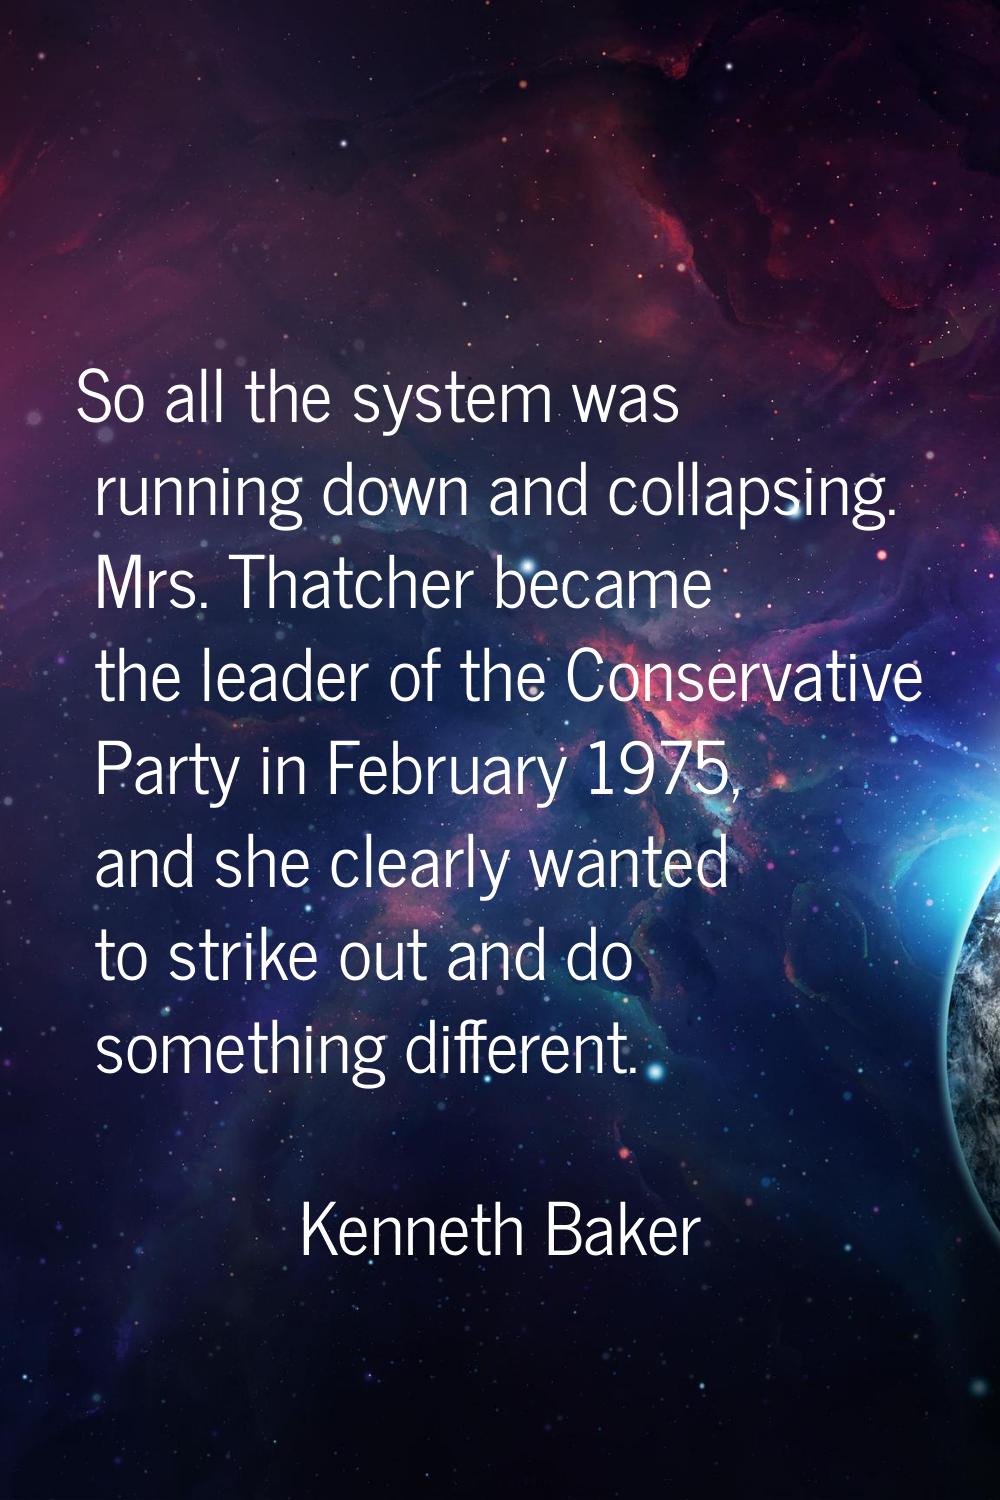 So all the system was running down and collapsing. Mrs. Thatcher became the leader of the Conservat